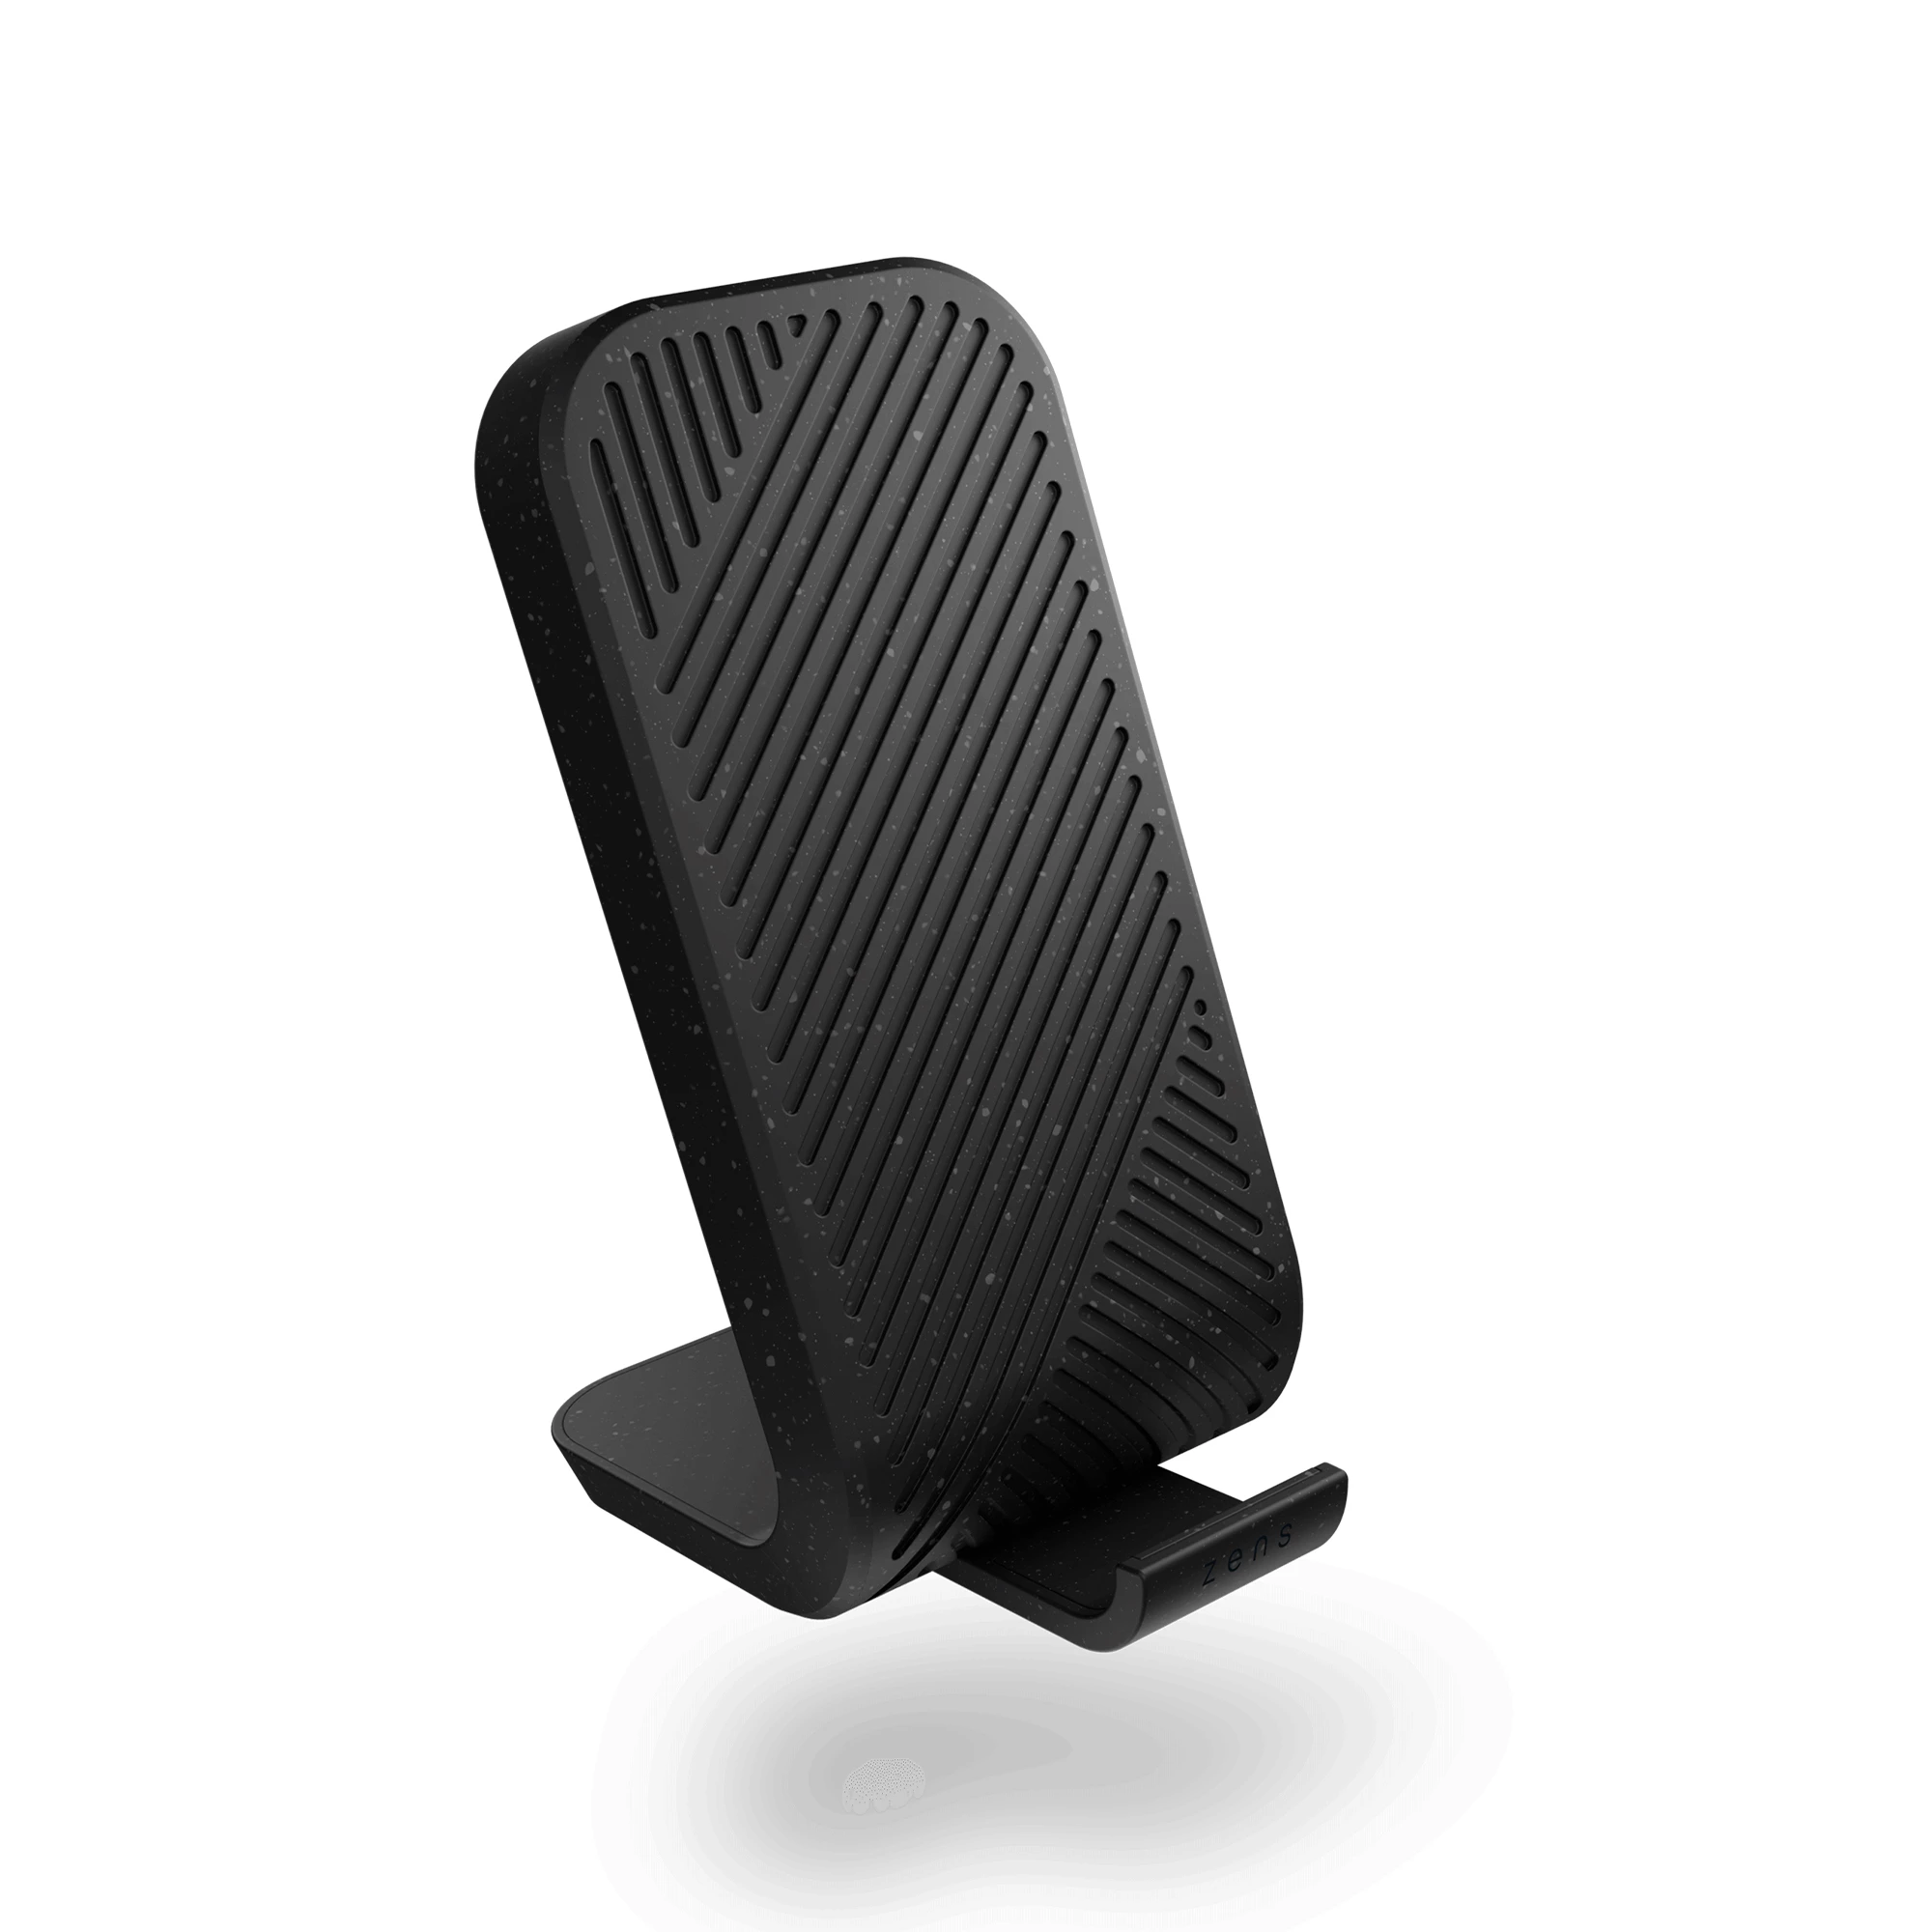 Zens Modular Stand Wireless Charger Black with Wall Charger (ZEMSC2P/00)